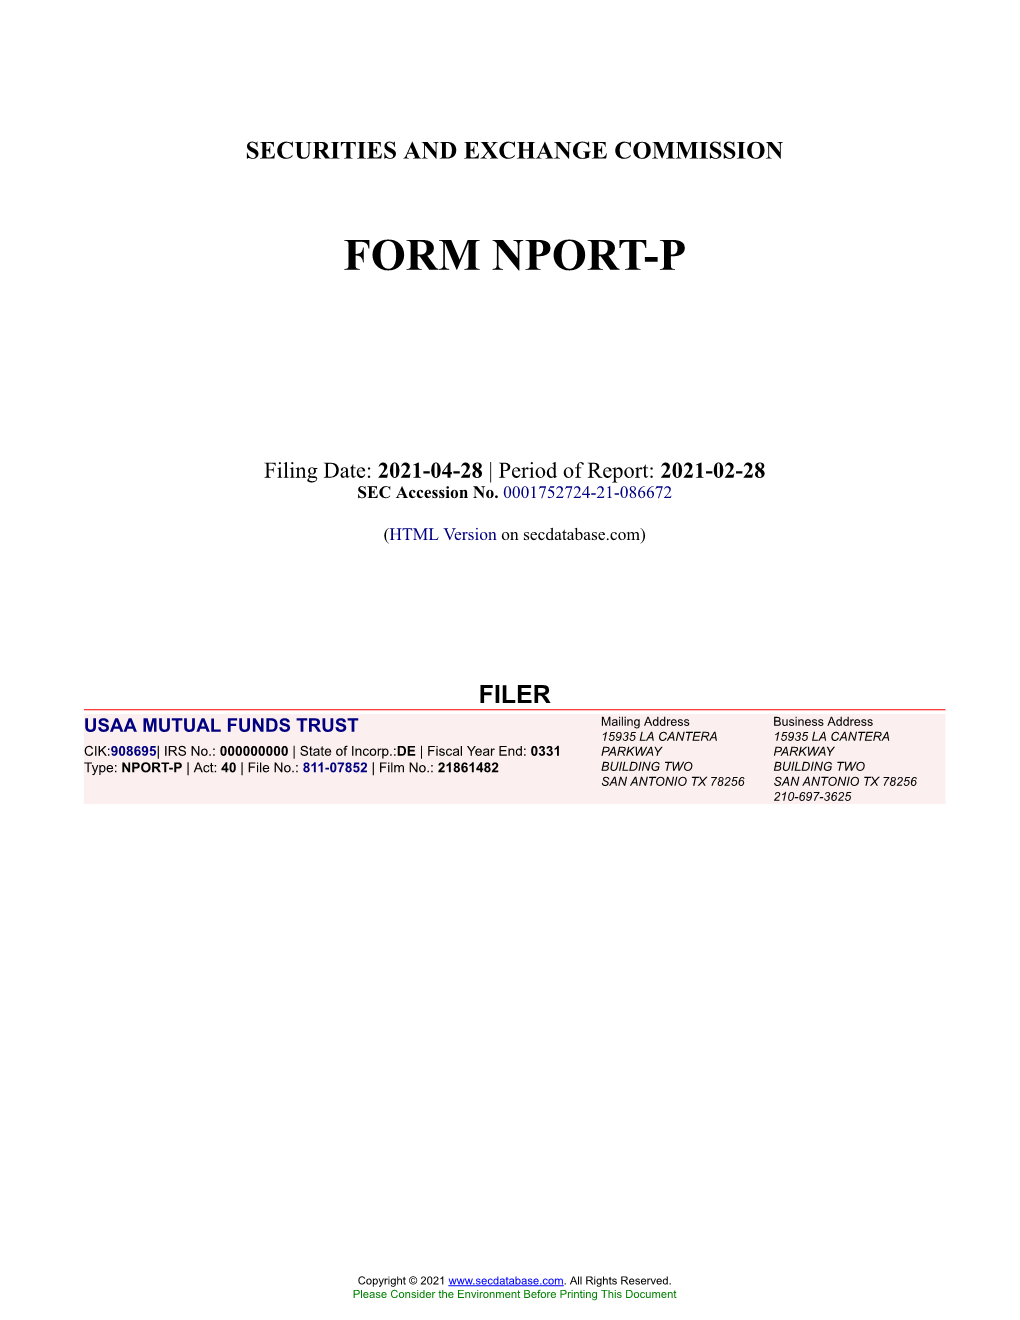 USAA MUTUAL FUNDS TRUST Form NPORT-P